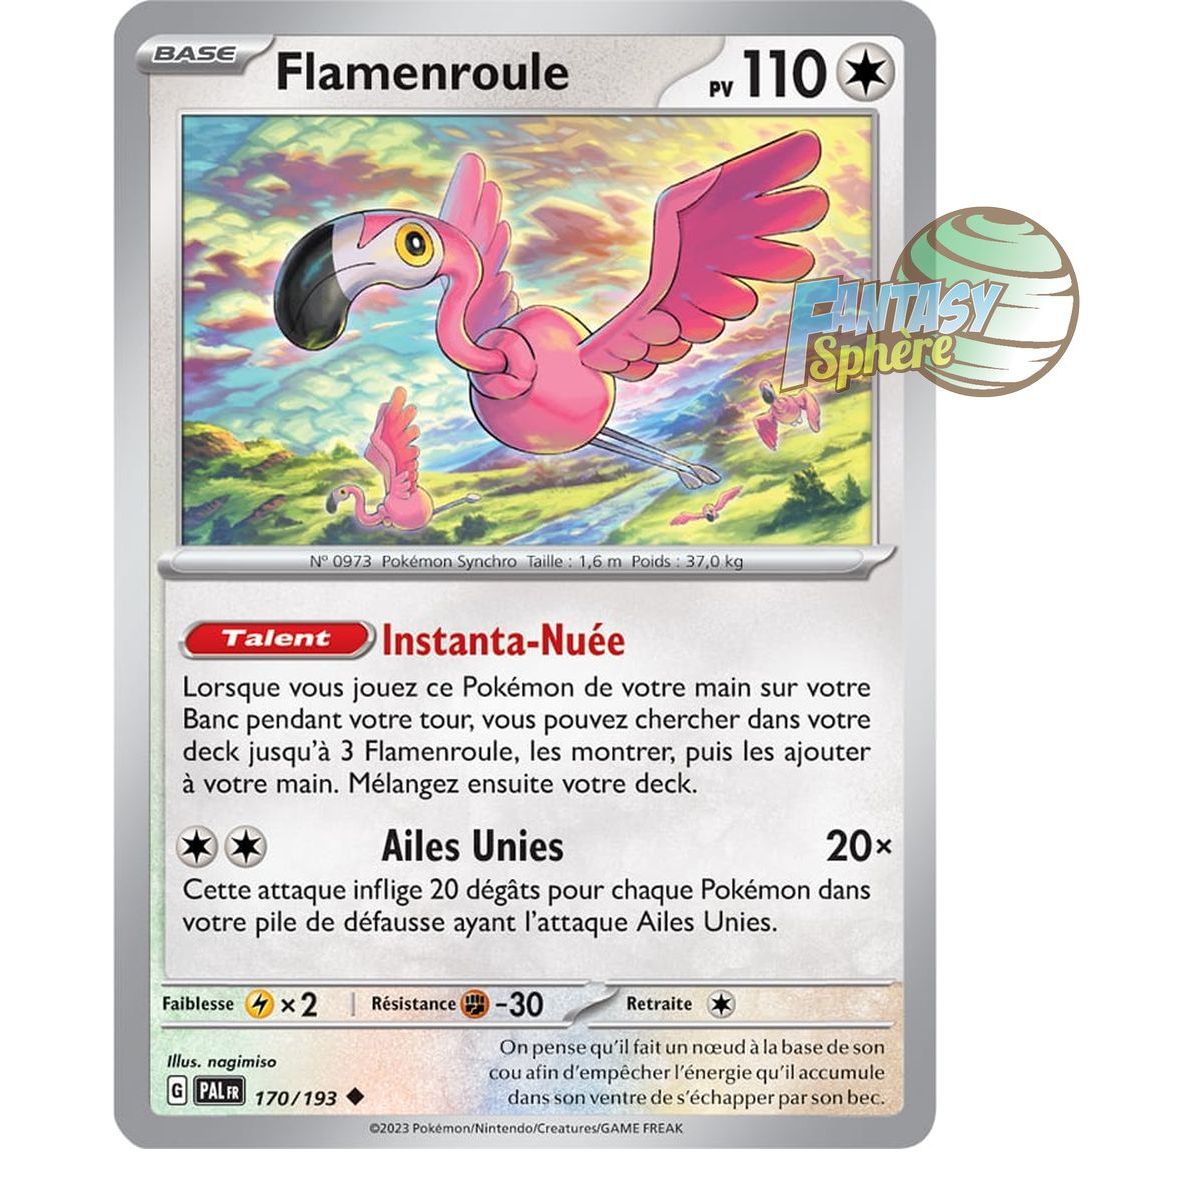 Flamroule - Uncommon 170/193 - Scarlet and Violet Evolution in Paldea